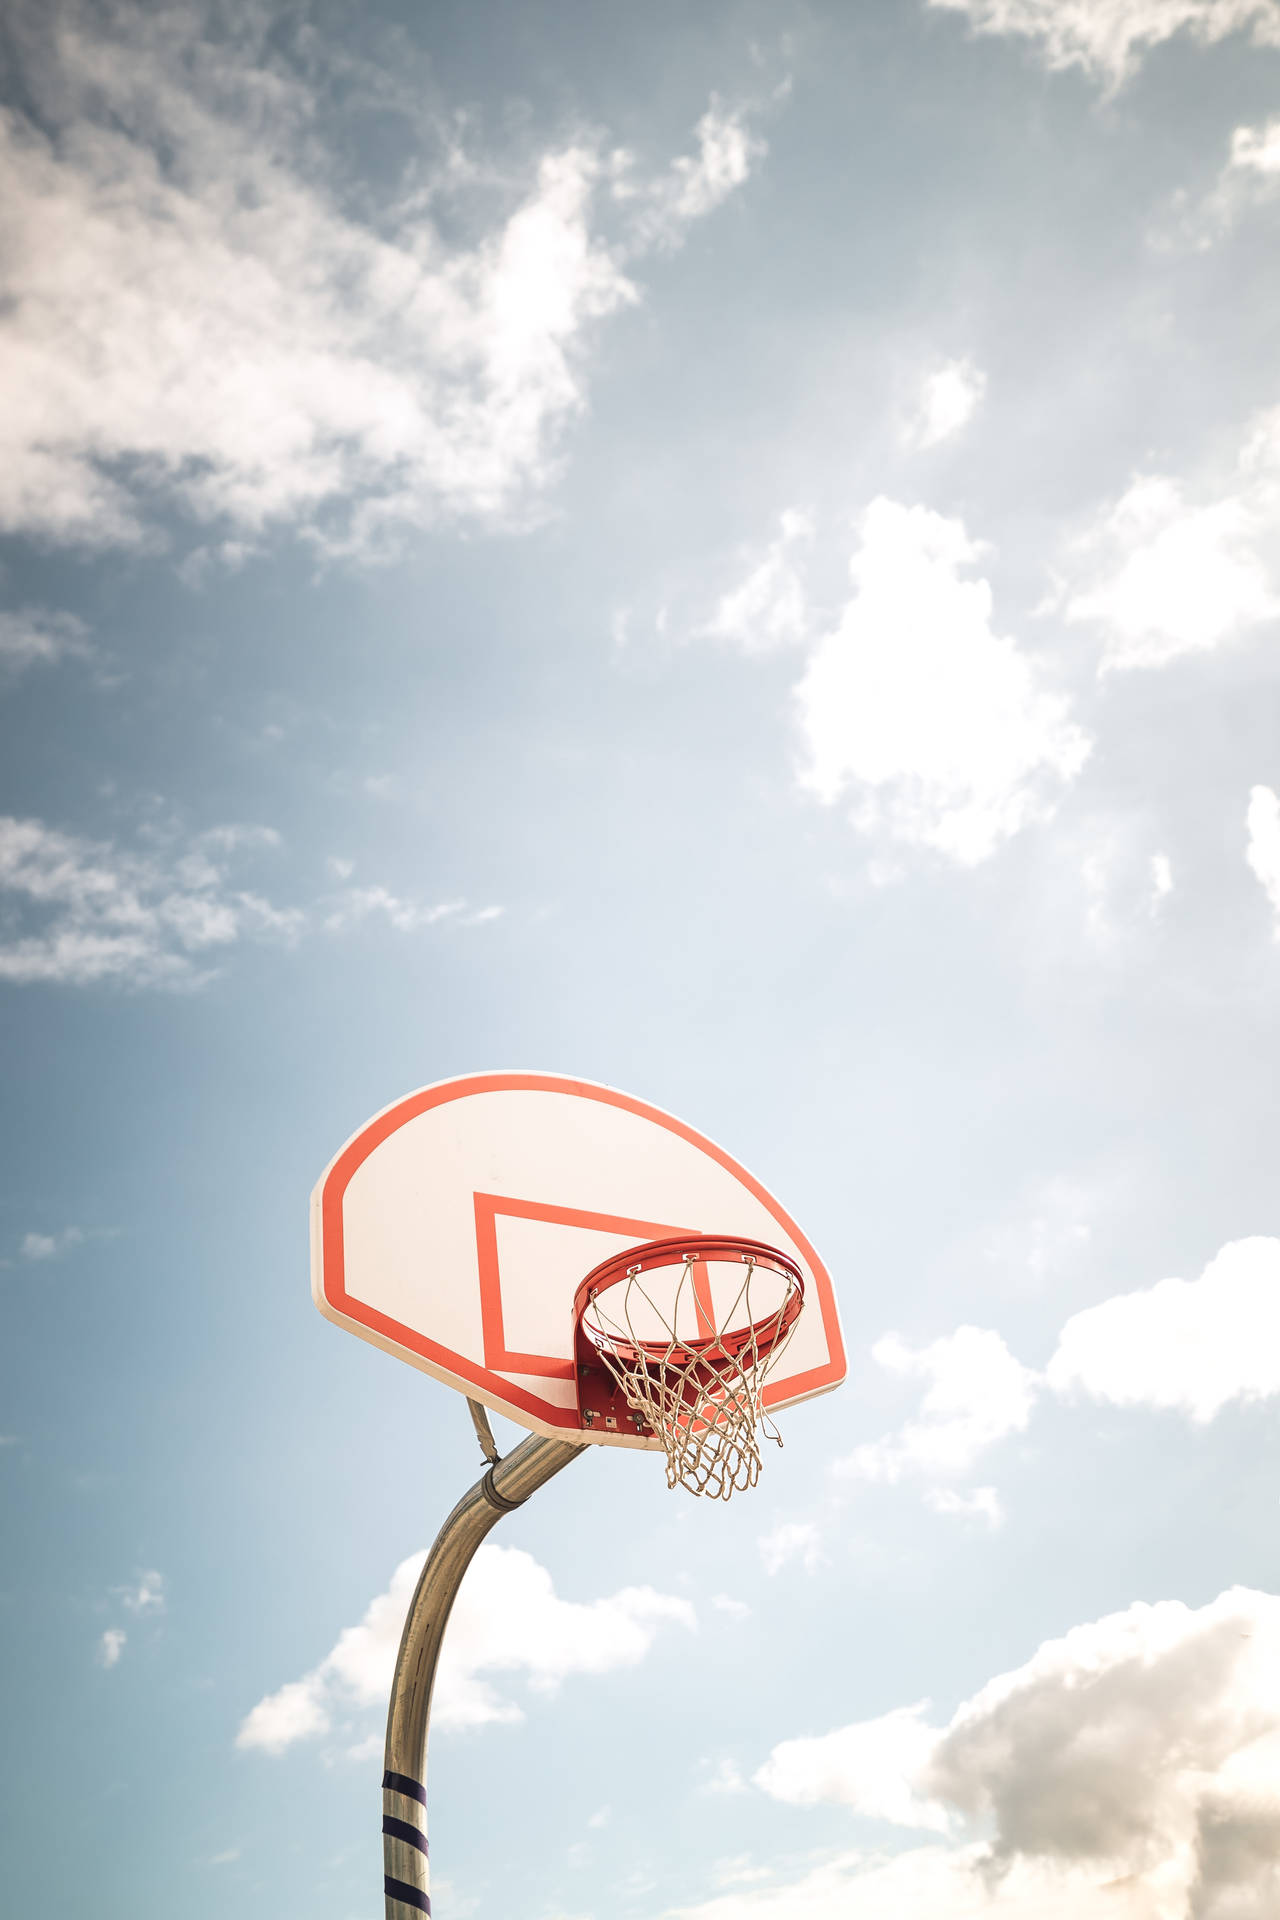 Basketball 3516X5274 Wallpaper and Background Image